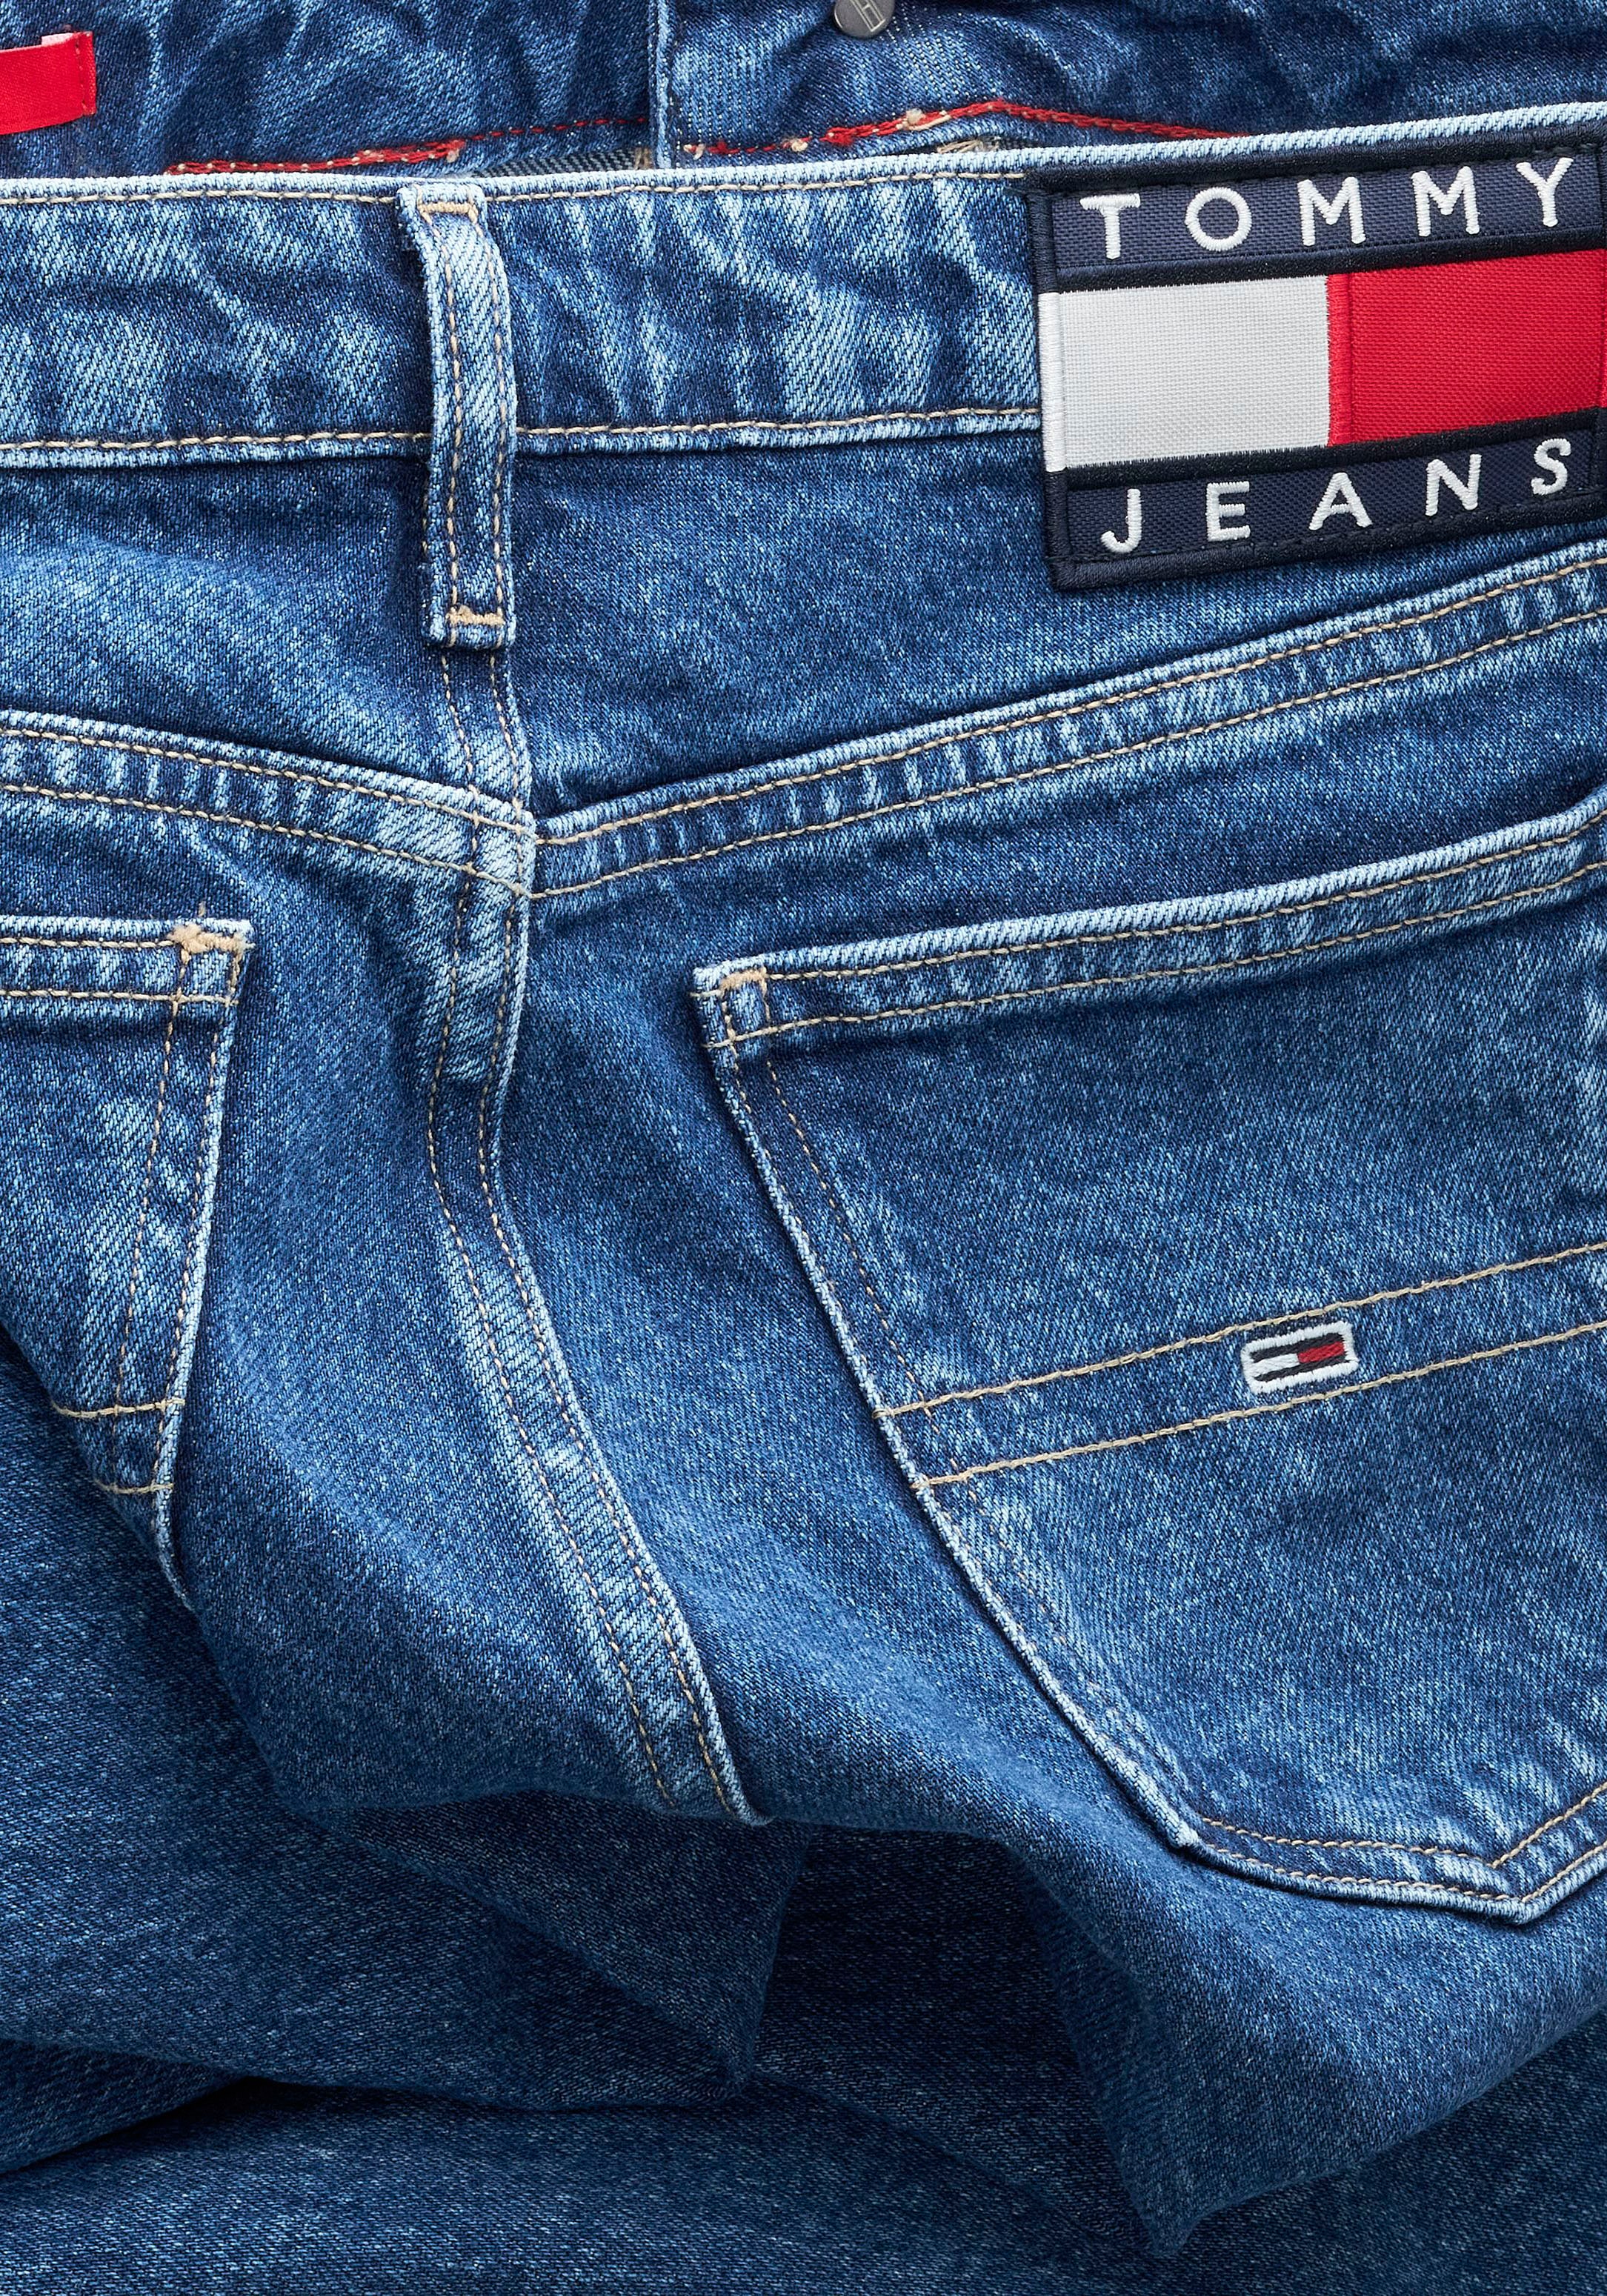 Tommy Jeans ♕ bei Tommy mit Jeans Schlagjeans, Logobadge